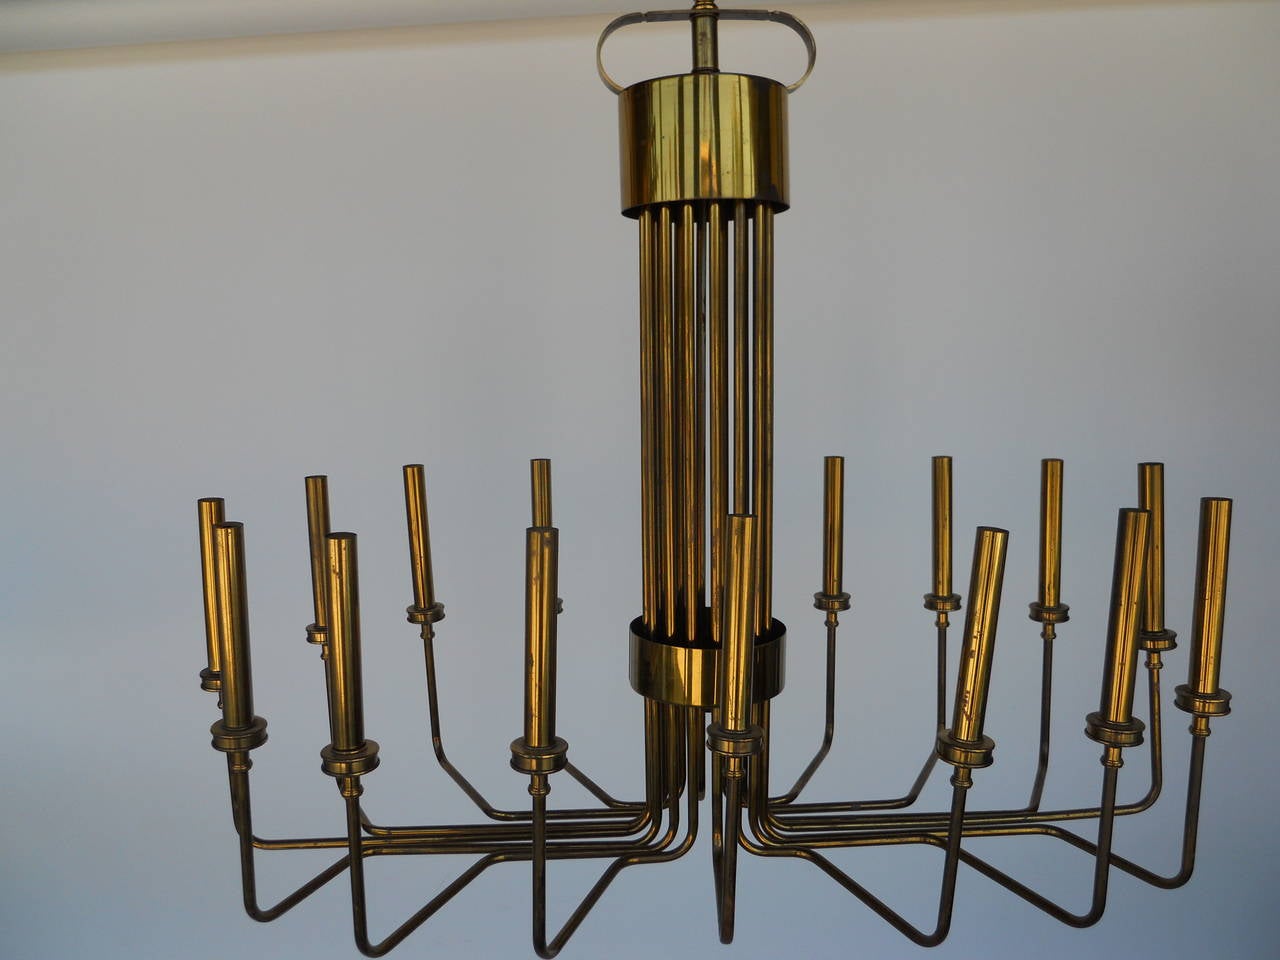 Tommi Parzinger Chandelier
(Tommi Parzinger - German born, started his company in New york in 1939)
patinated brass
16 lights